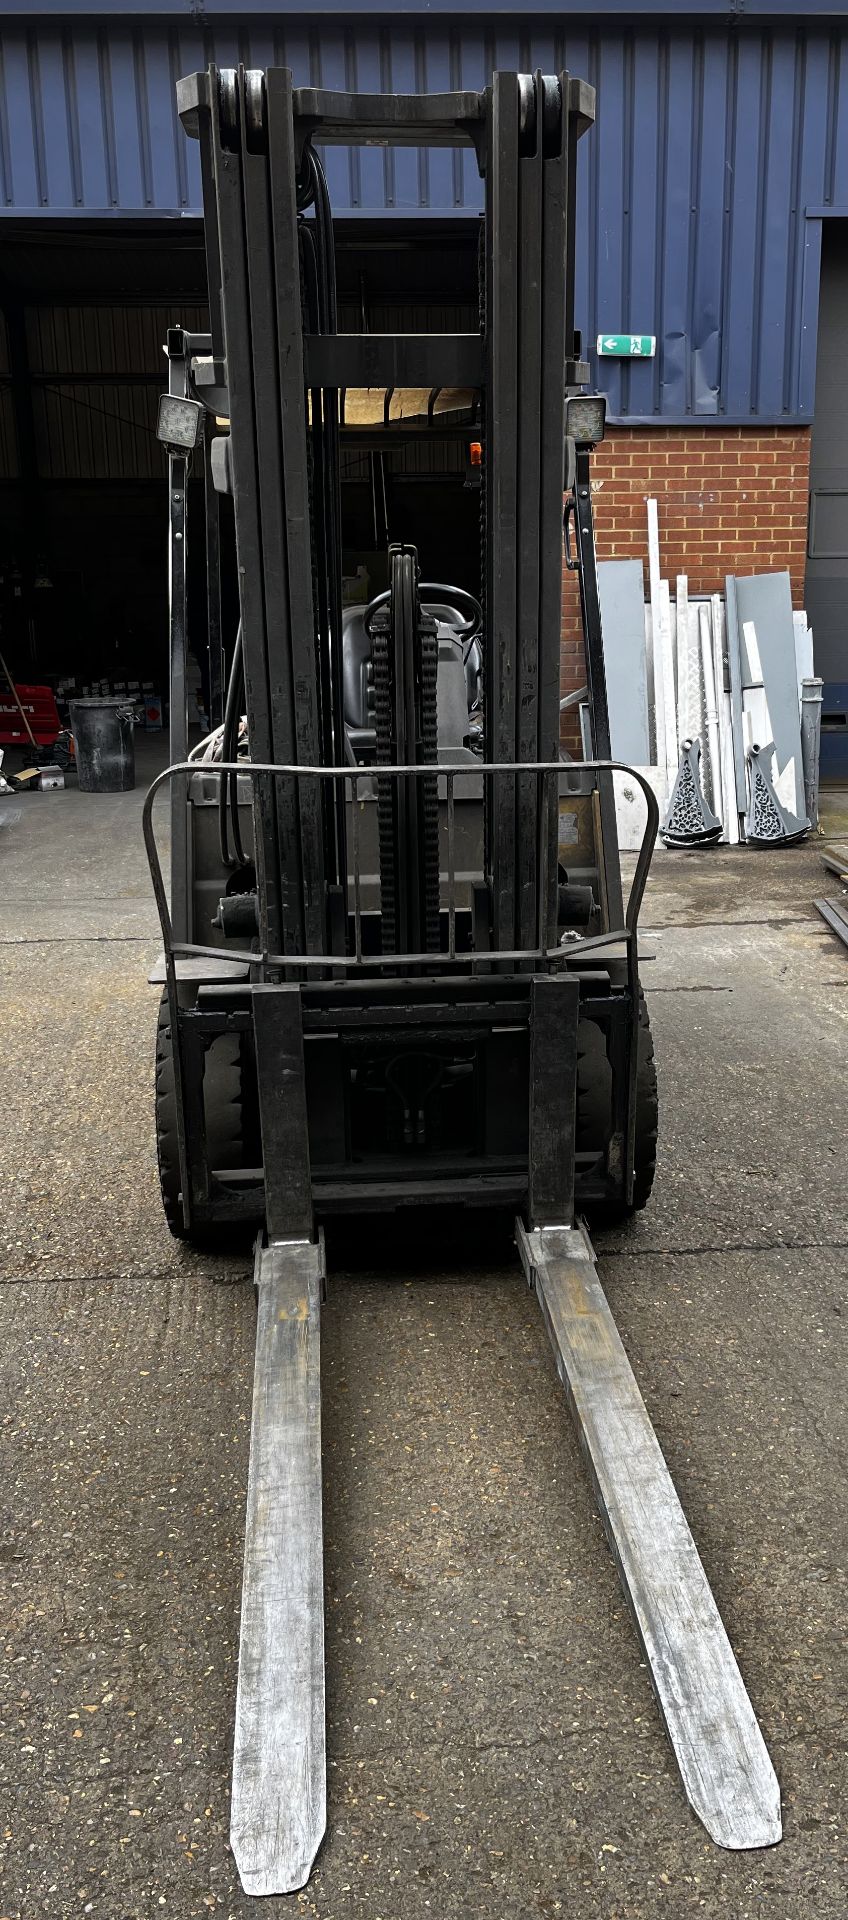 2008 Caterpillar EP35K PAC 4 Wheel Electric Forklift Truck 3500 kg with Extension with Hoppecke - Image 4 of 8